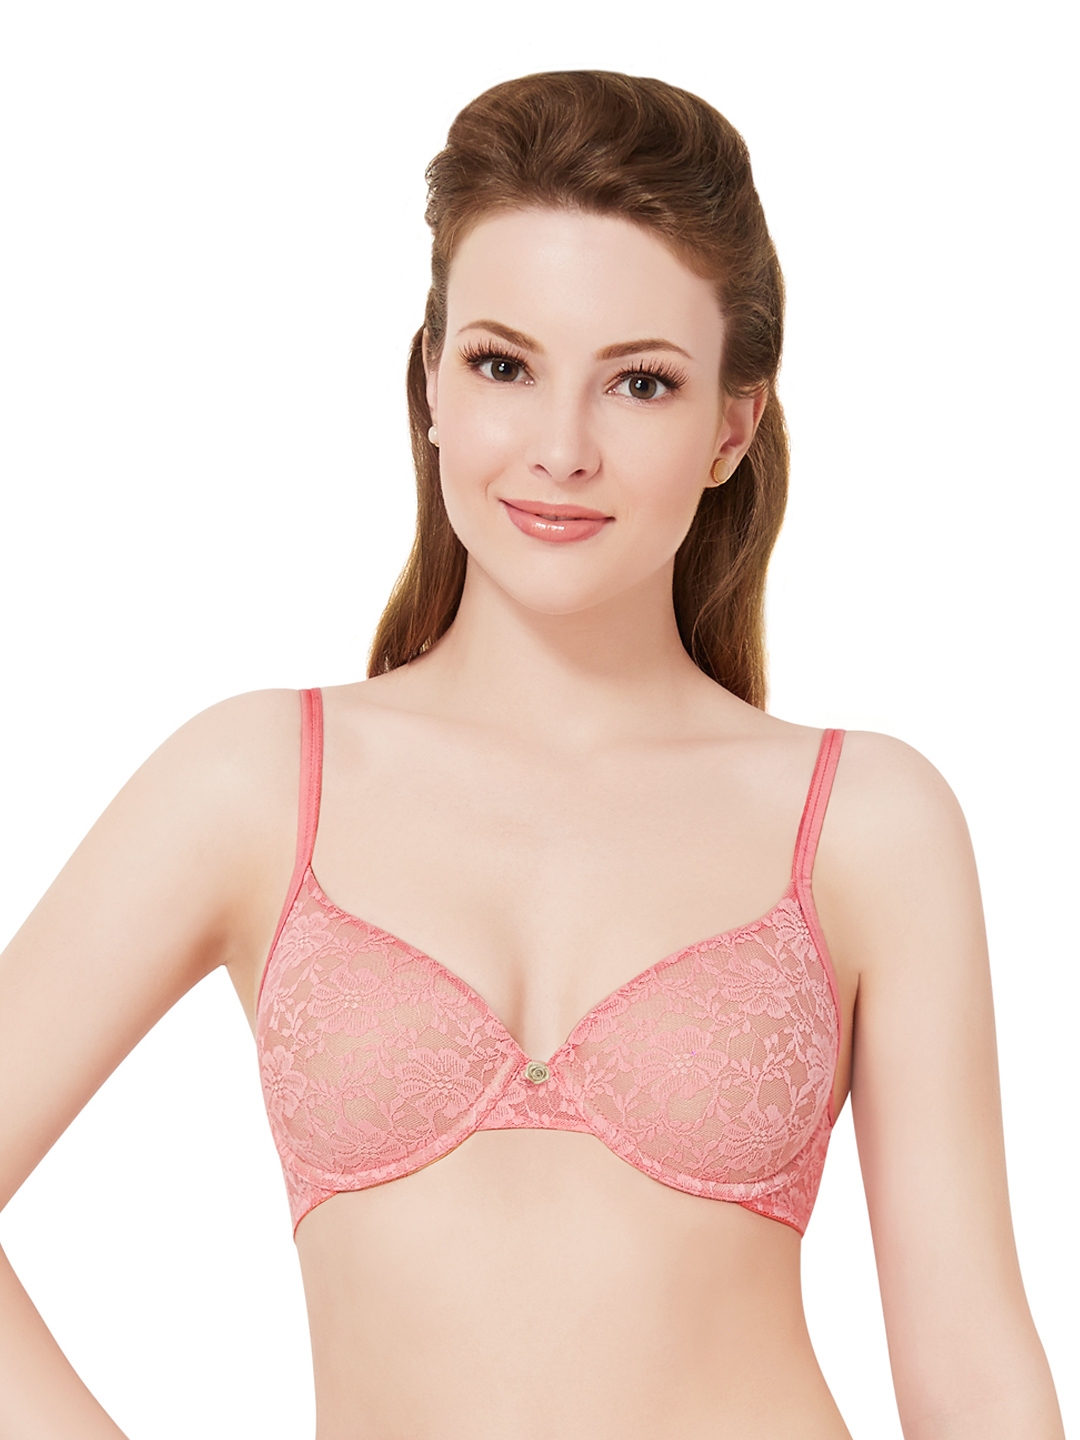 Buy Amante Padded Wired Floral Romance Lace Bra BRA10301 - Bra for Women  1627990